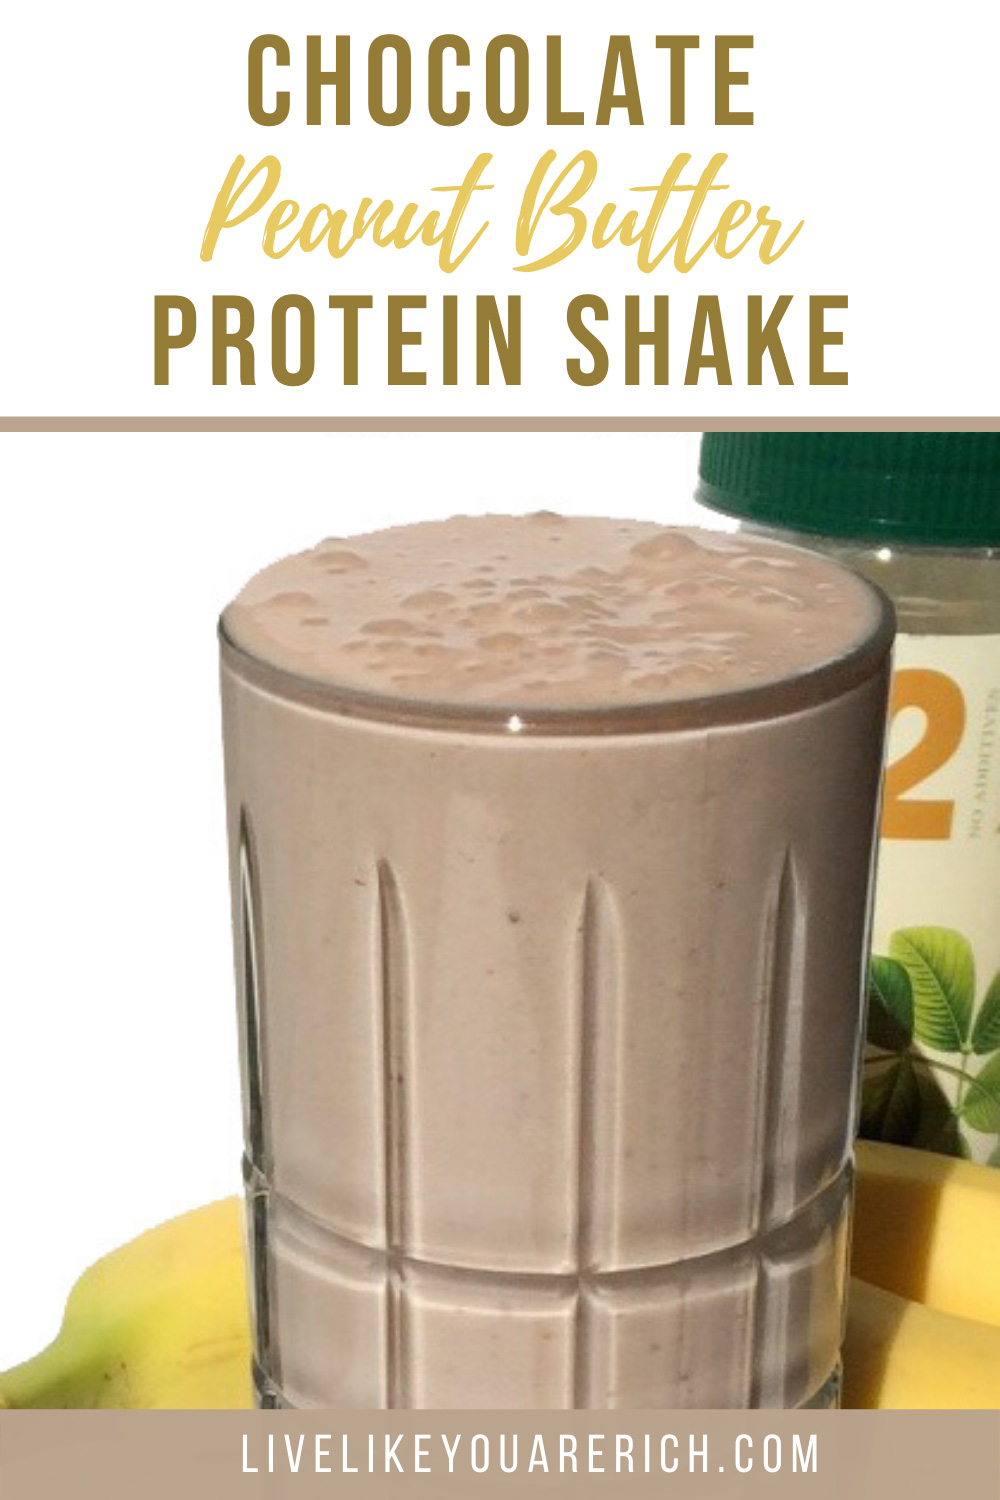 Chocolate Peanut Butter Protein Shake. This is my favorite meal replacement/protein shake. It's delish, only has 275 healthy calories, and is very filling! Perfect for a healthy dessert! #proteinshake #smoothie